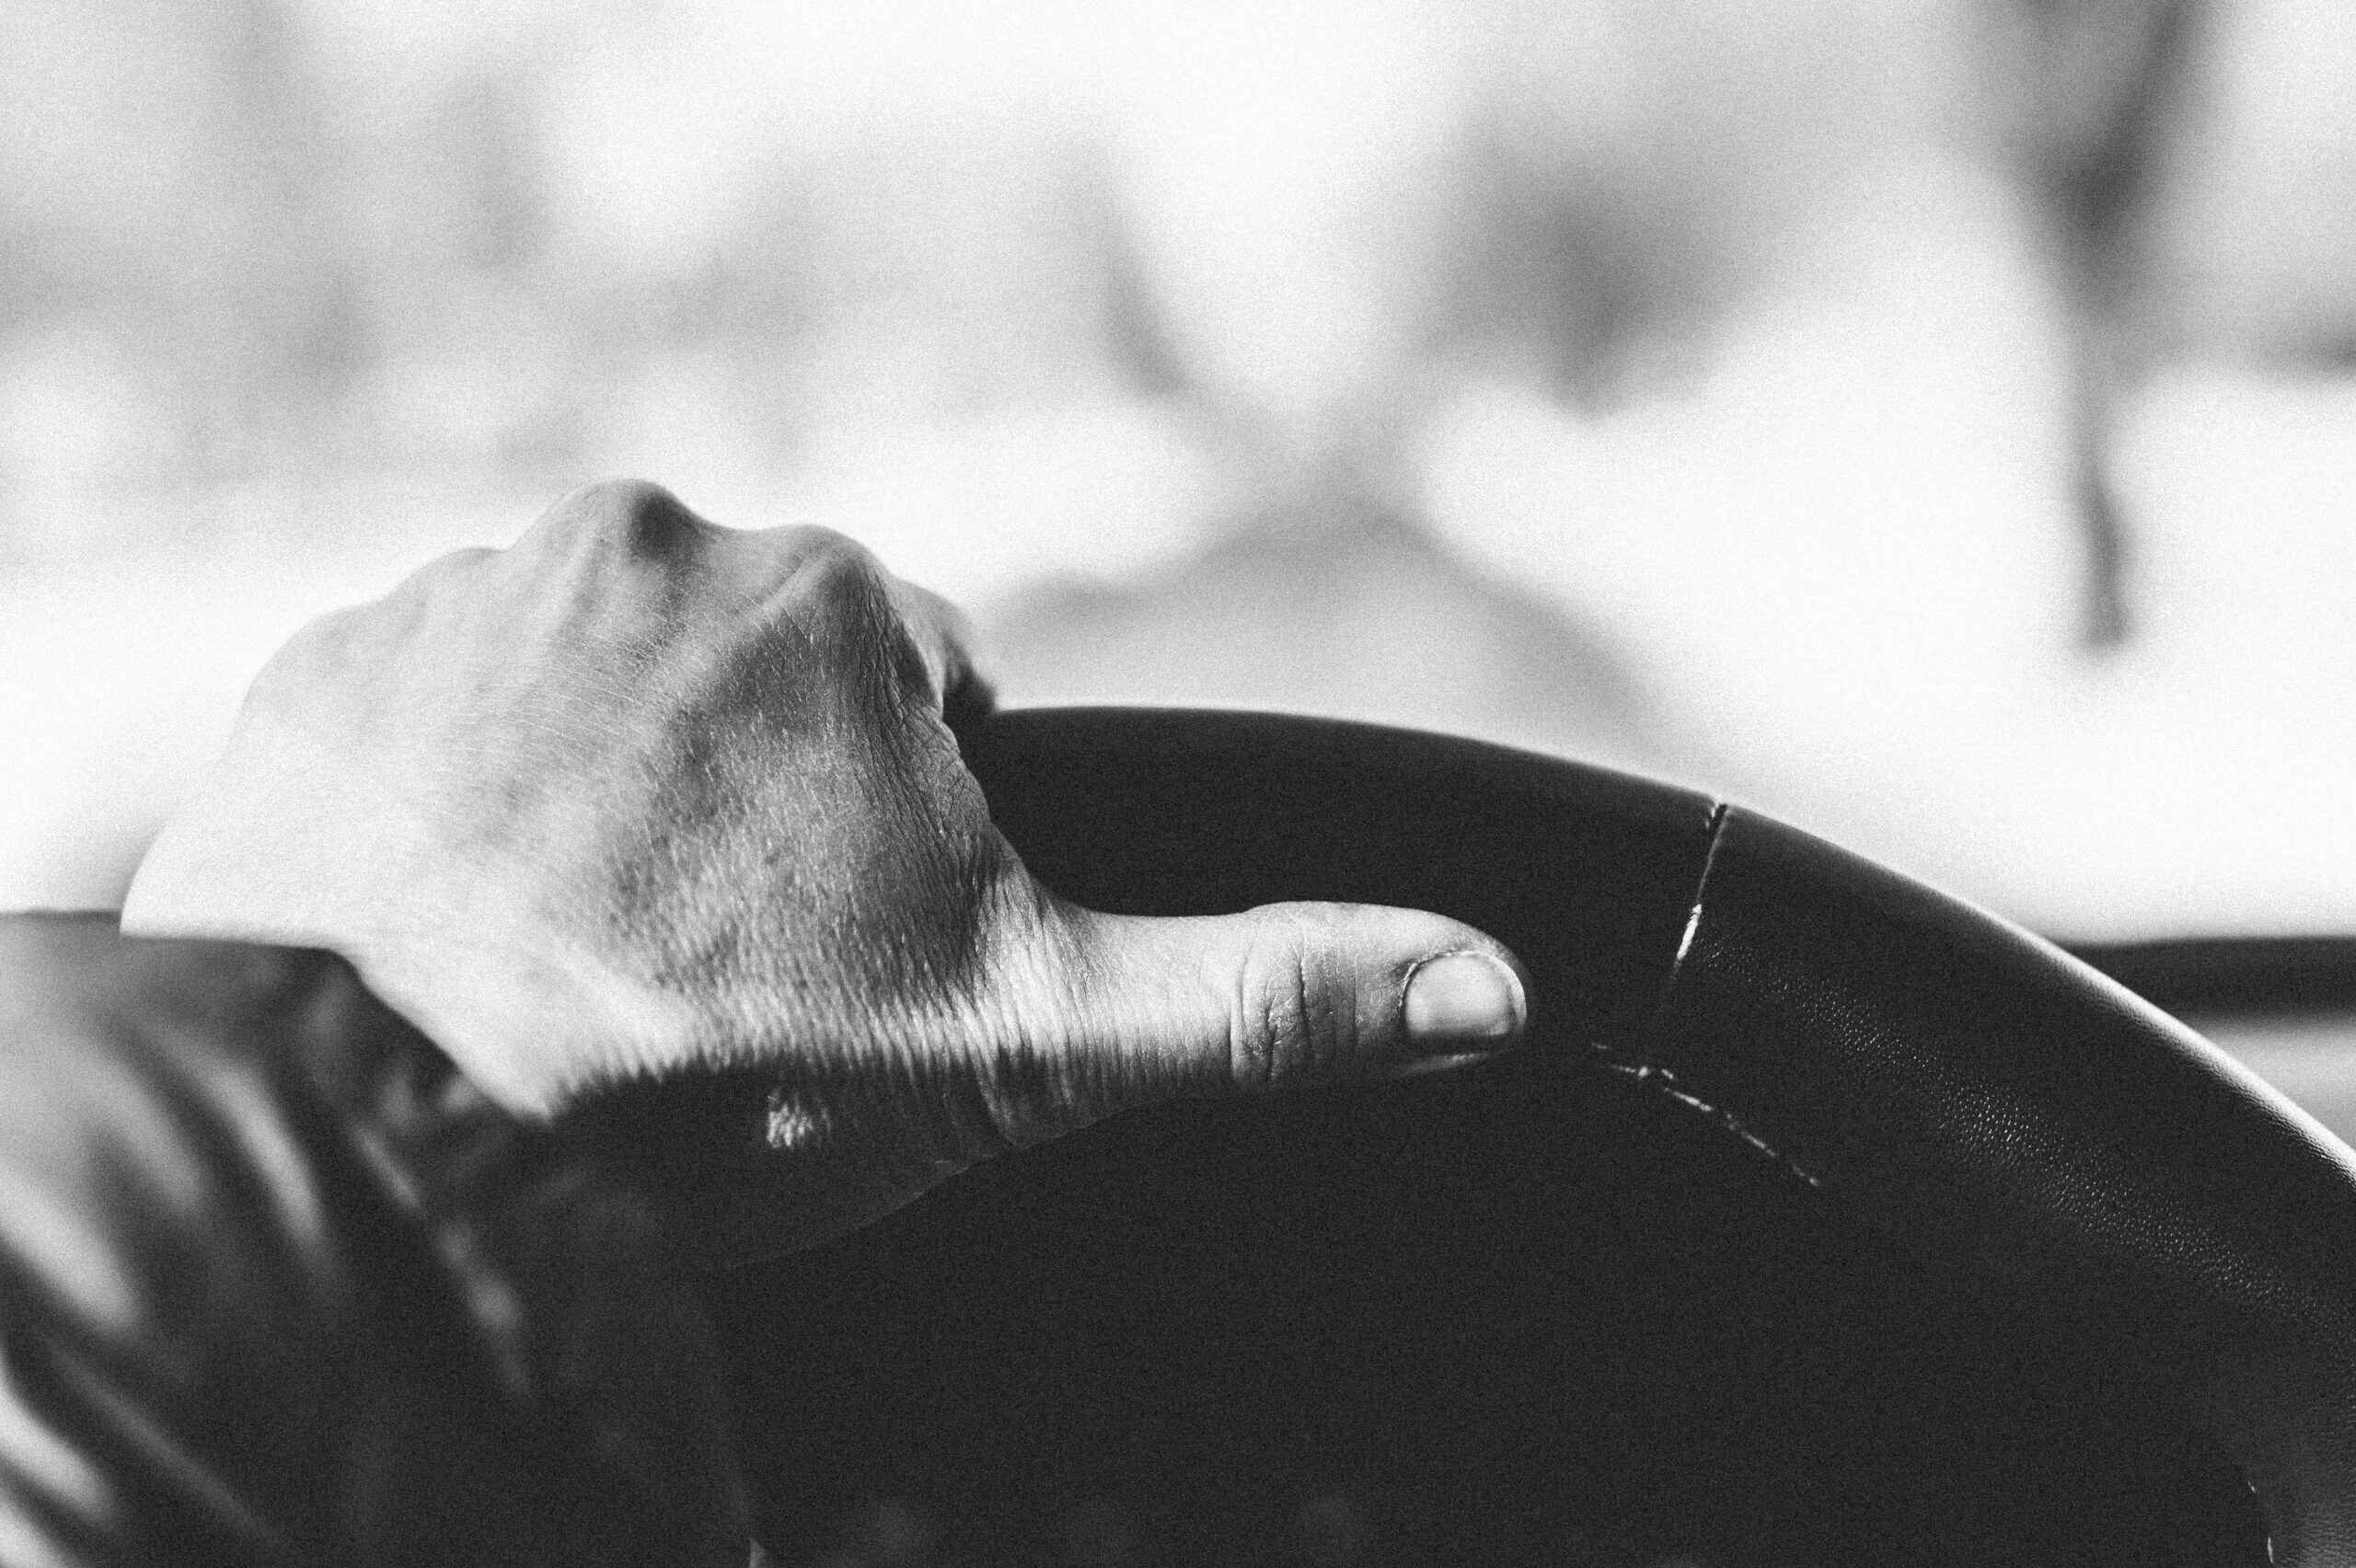 Woman's left hand tightly grasped on steering wheel, outside windshield out of focus, black and white photo.